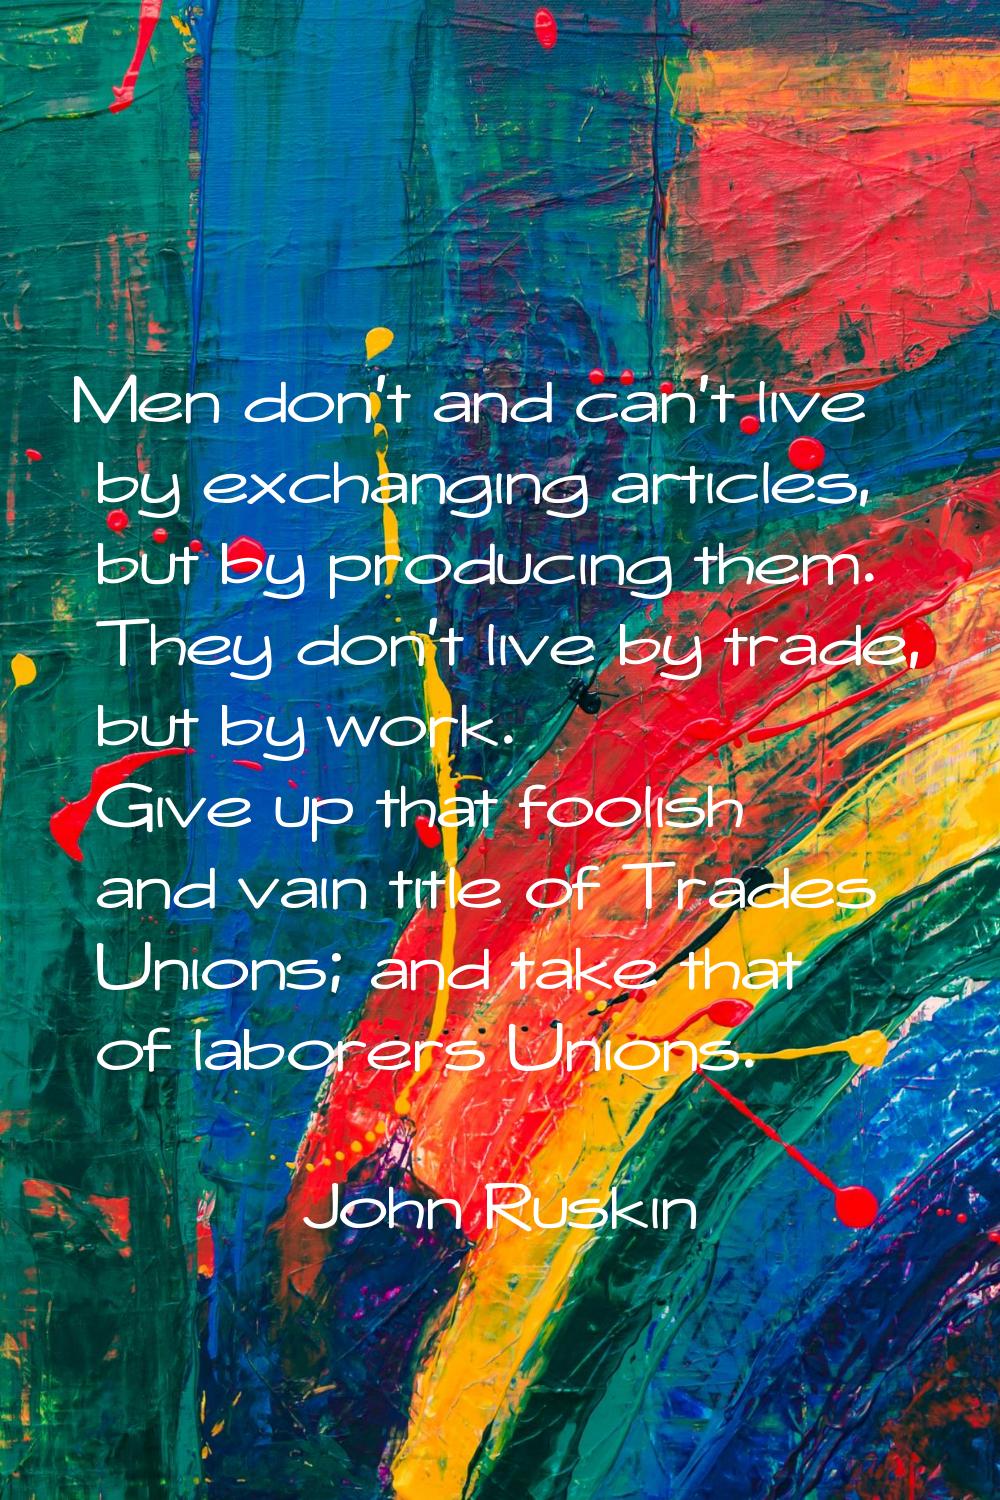 Men don't and can't live by exchanging articles, but by producing them. They don't live by trade, b